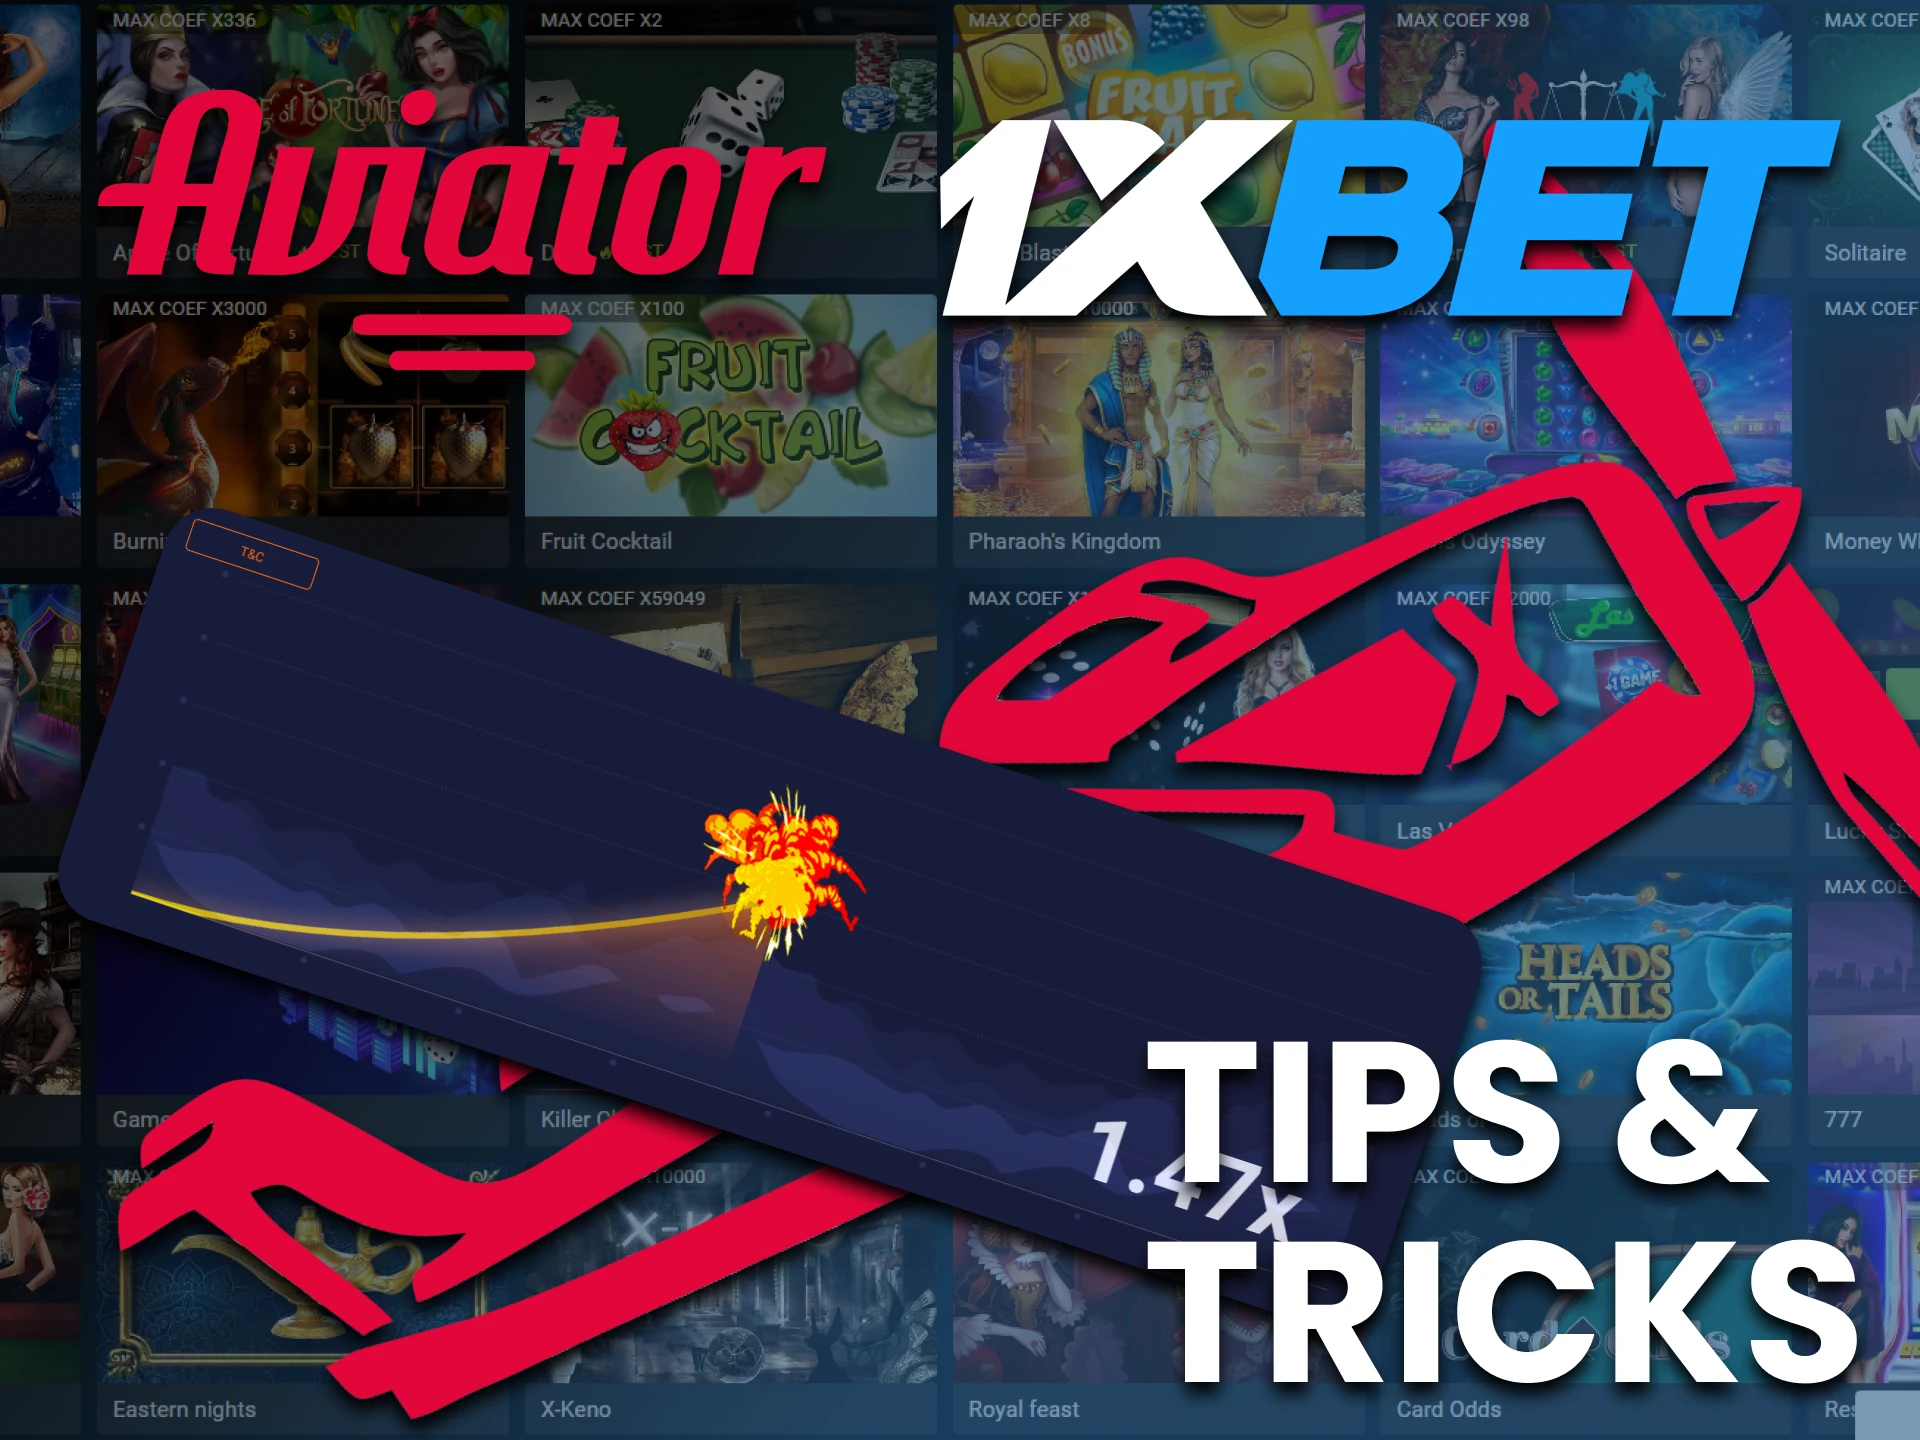 Follow our tips to increase your chance to win in the Aviator game.